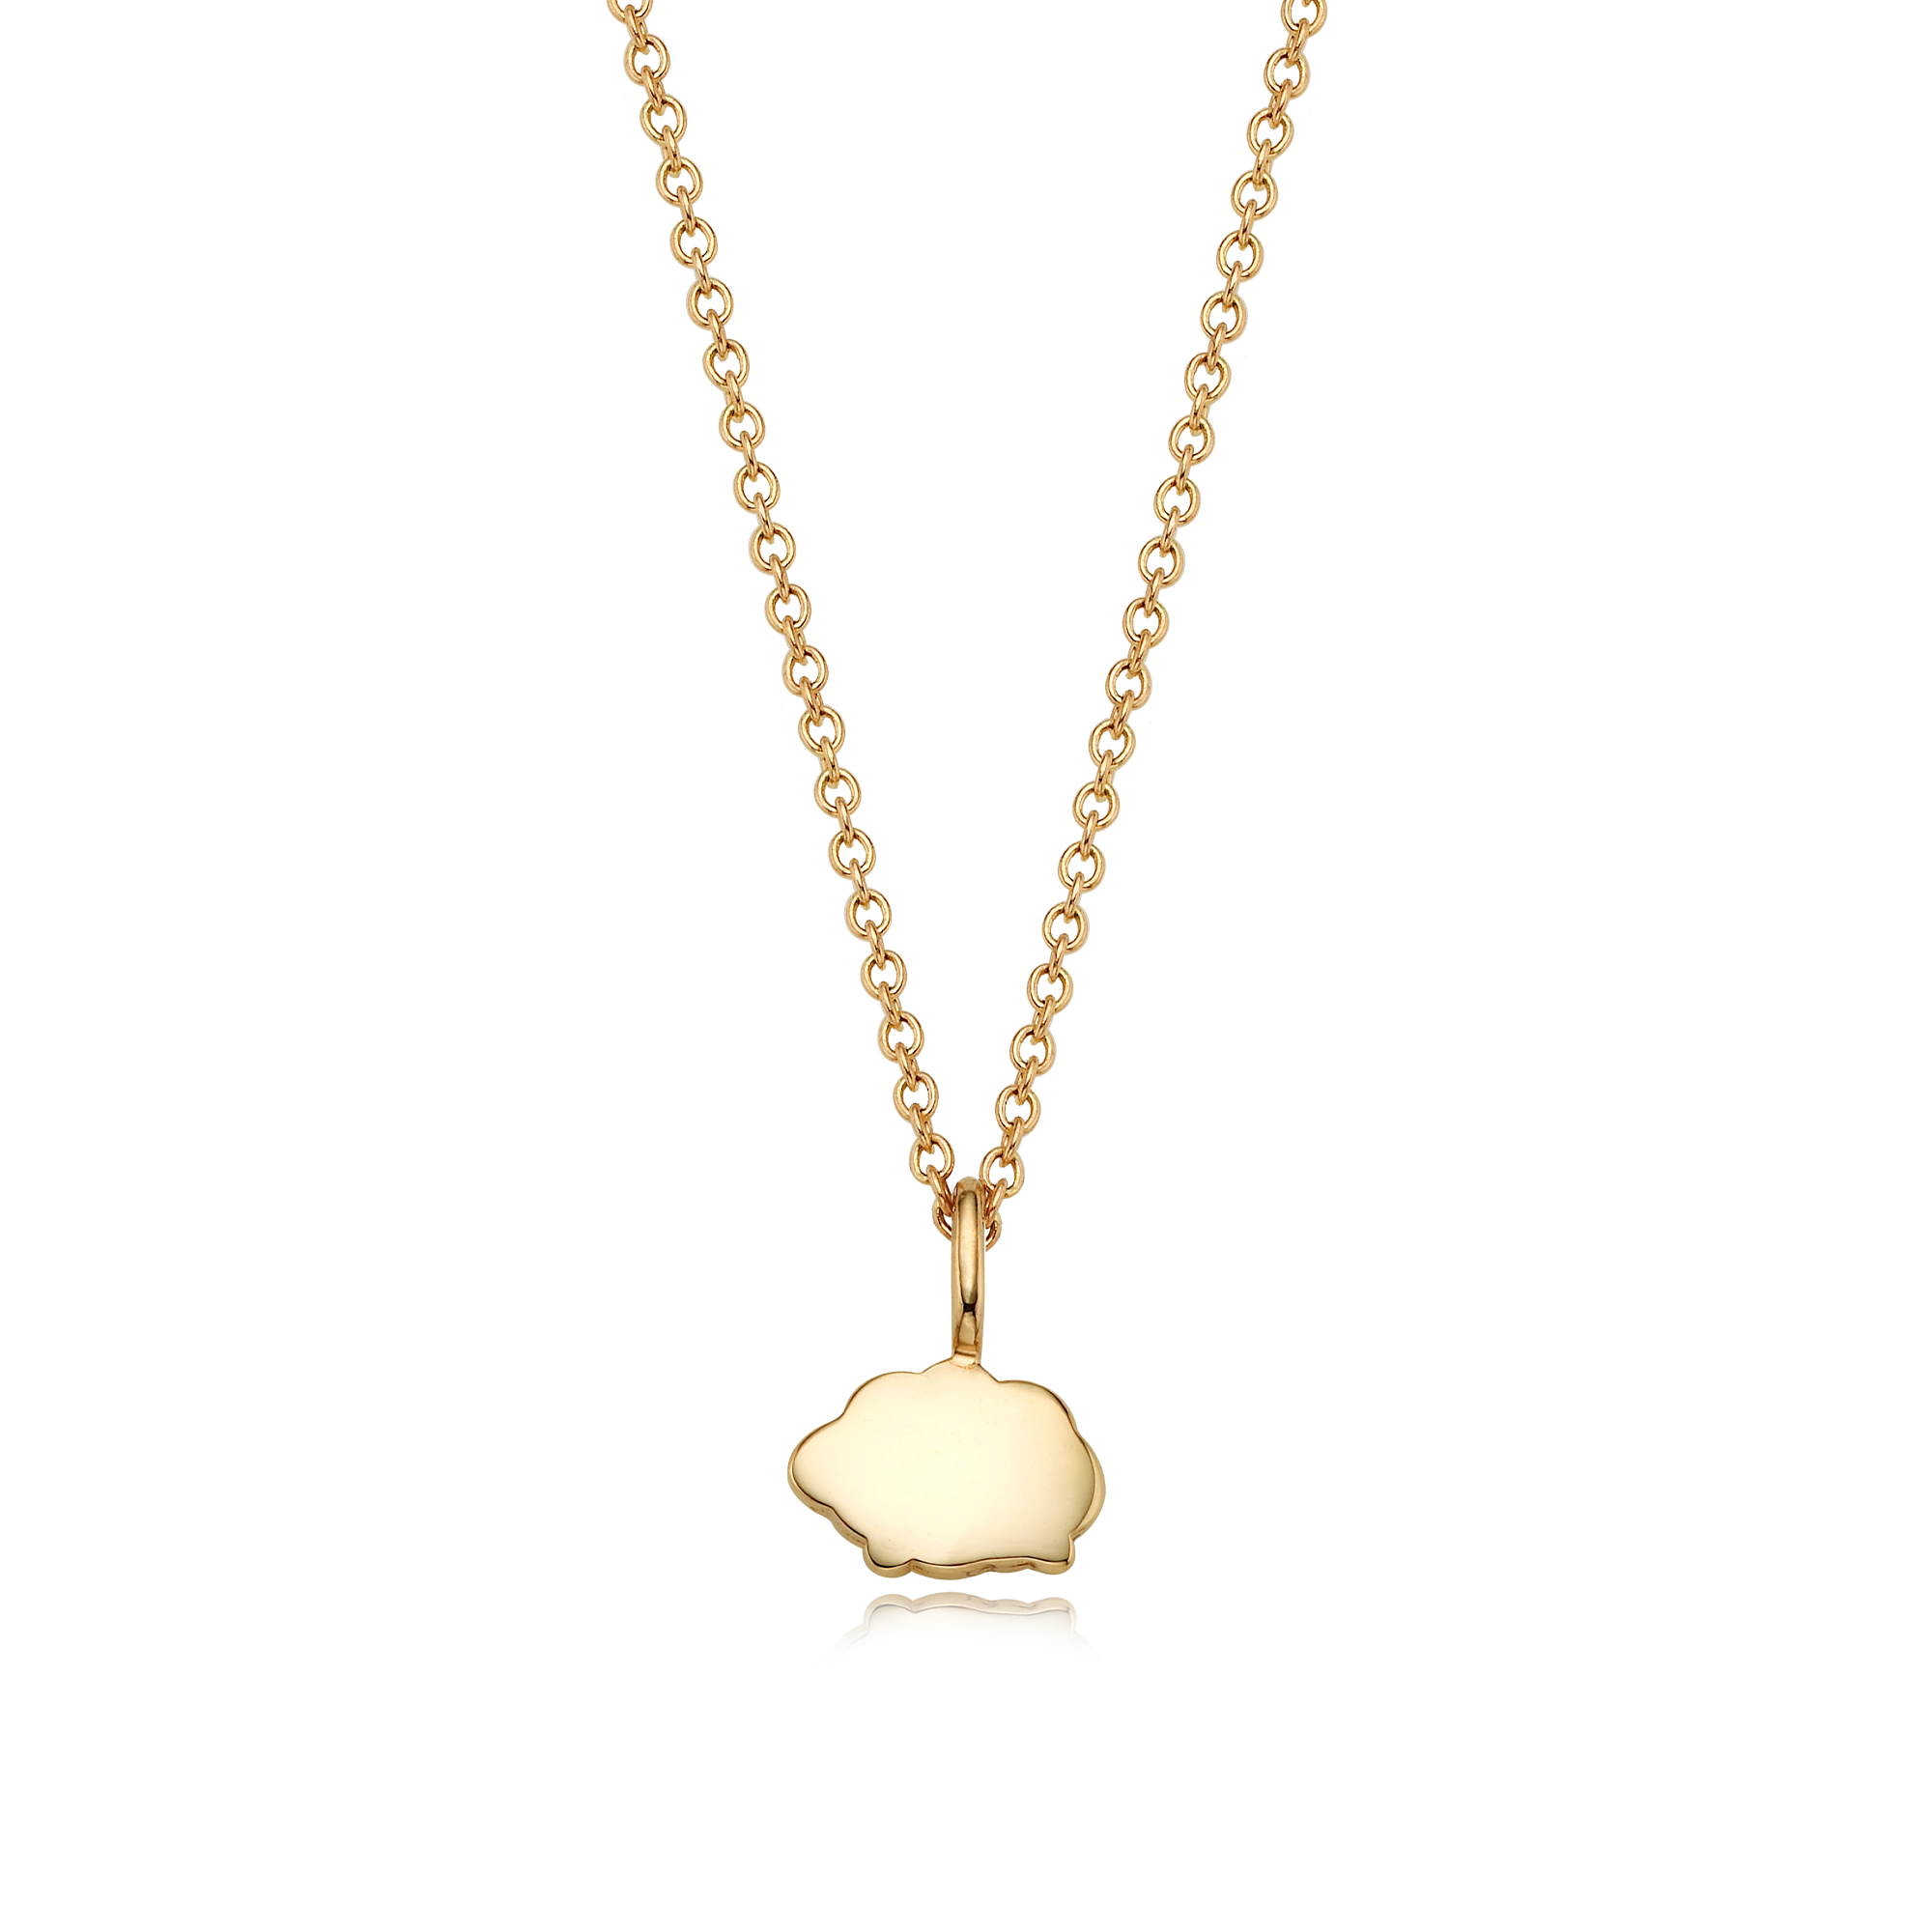 14K/18K Gold Mini Zodiac Sign of the Sheep - My Guardian Animal Necklace